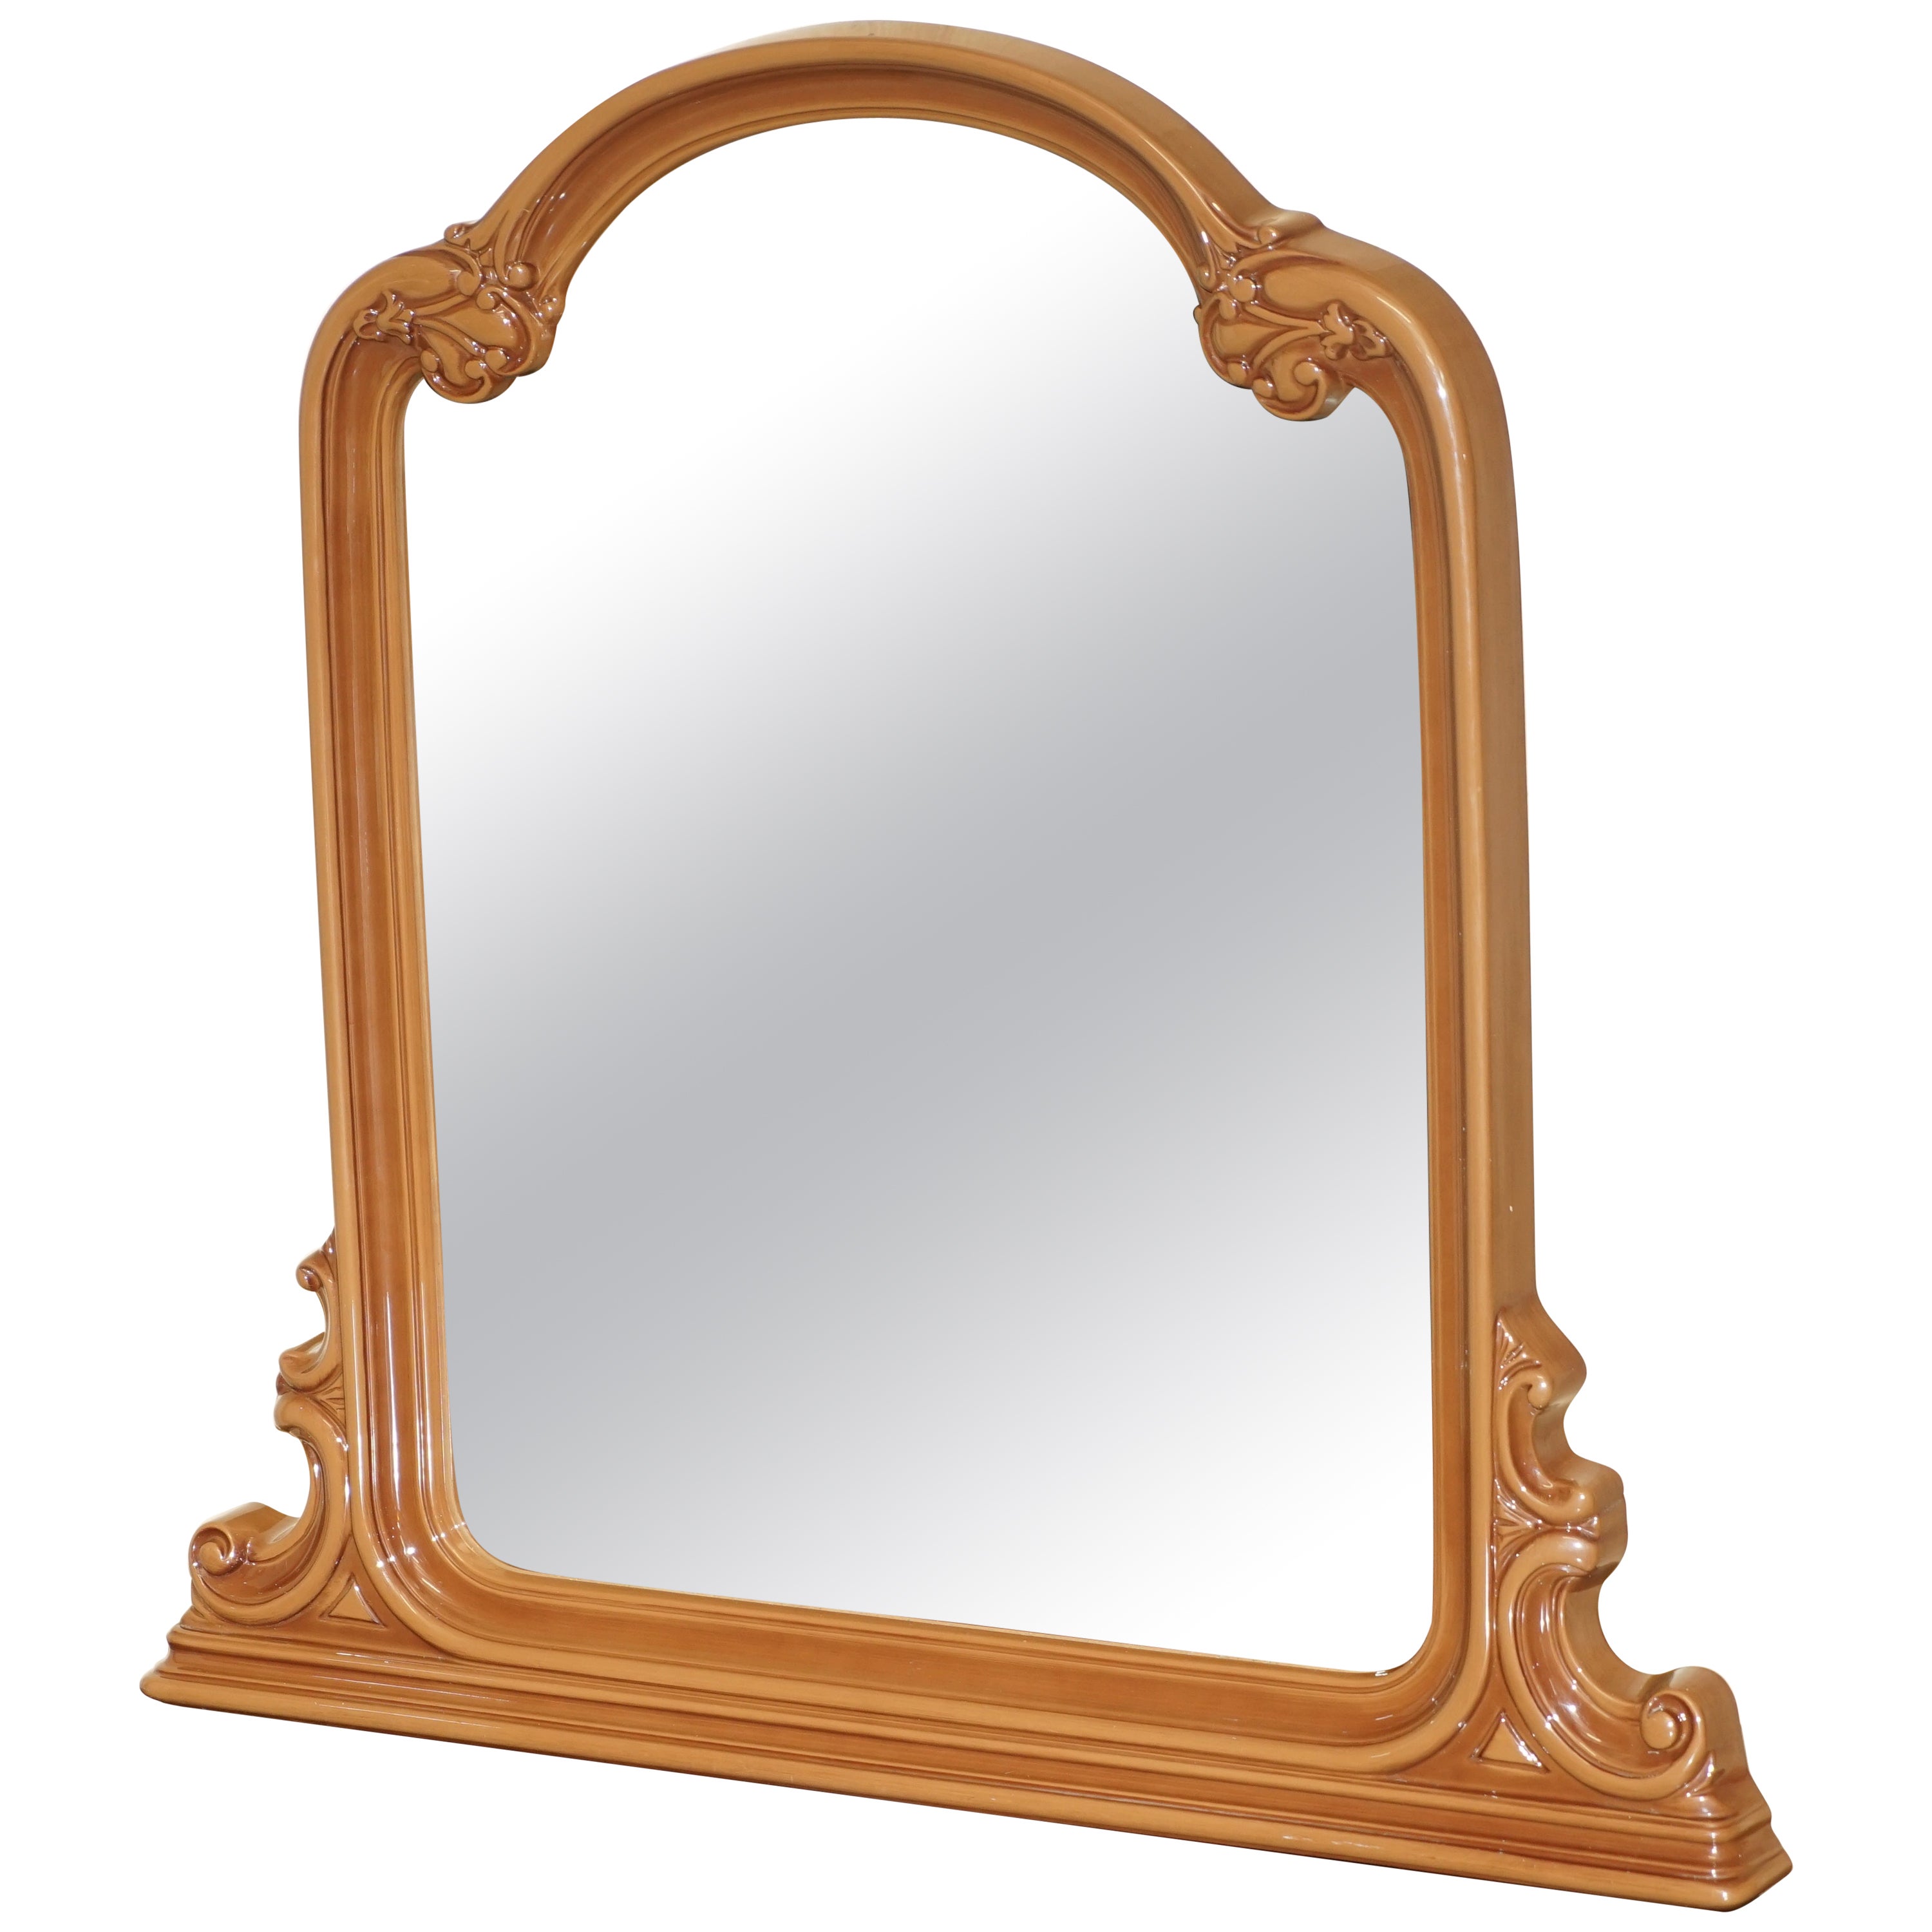 DECORATIVE & ViNTAGE STYLE OVERMANTLE OR DRESSING TABLE MIRROR WITH THICK FRAME For Sale